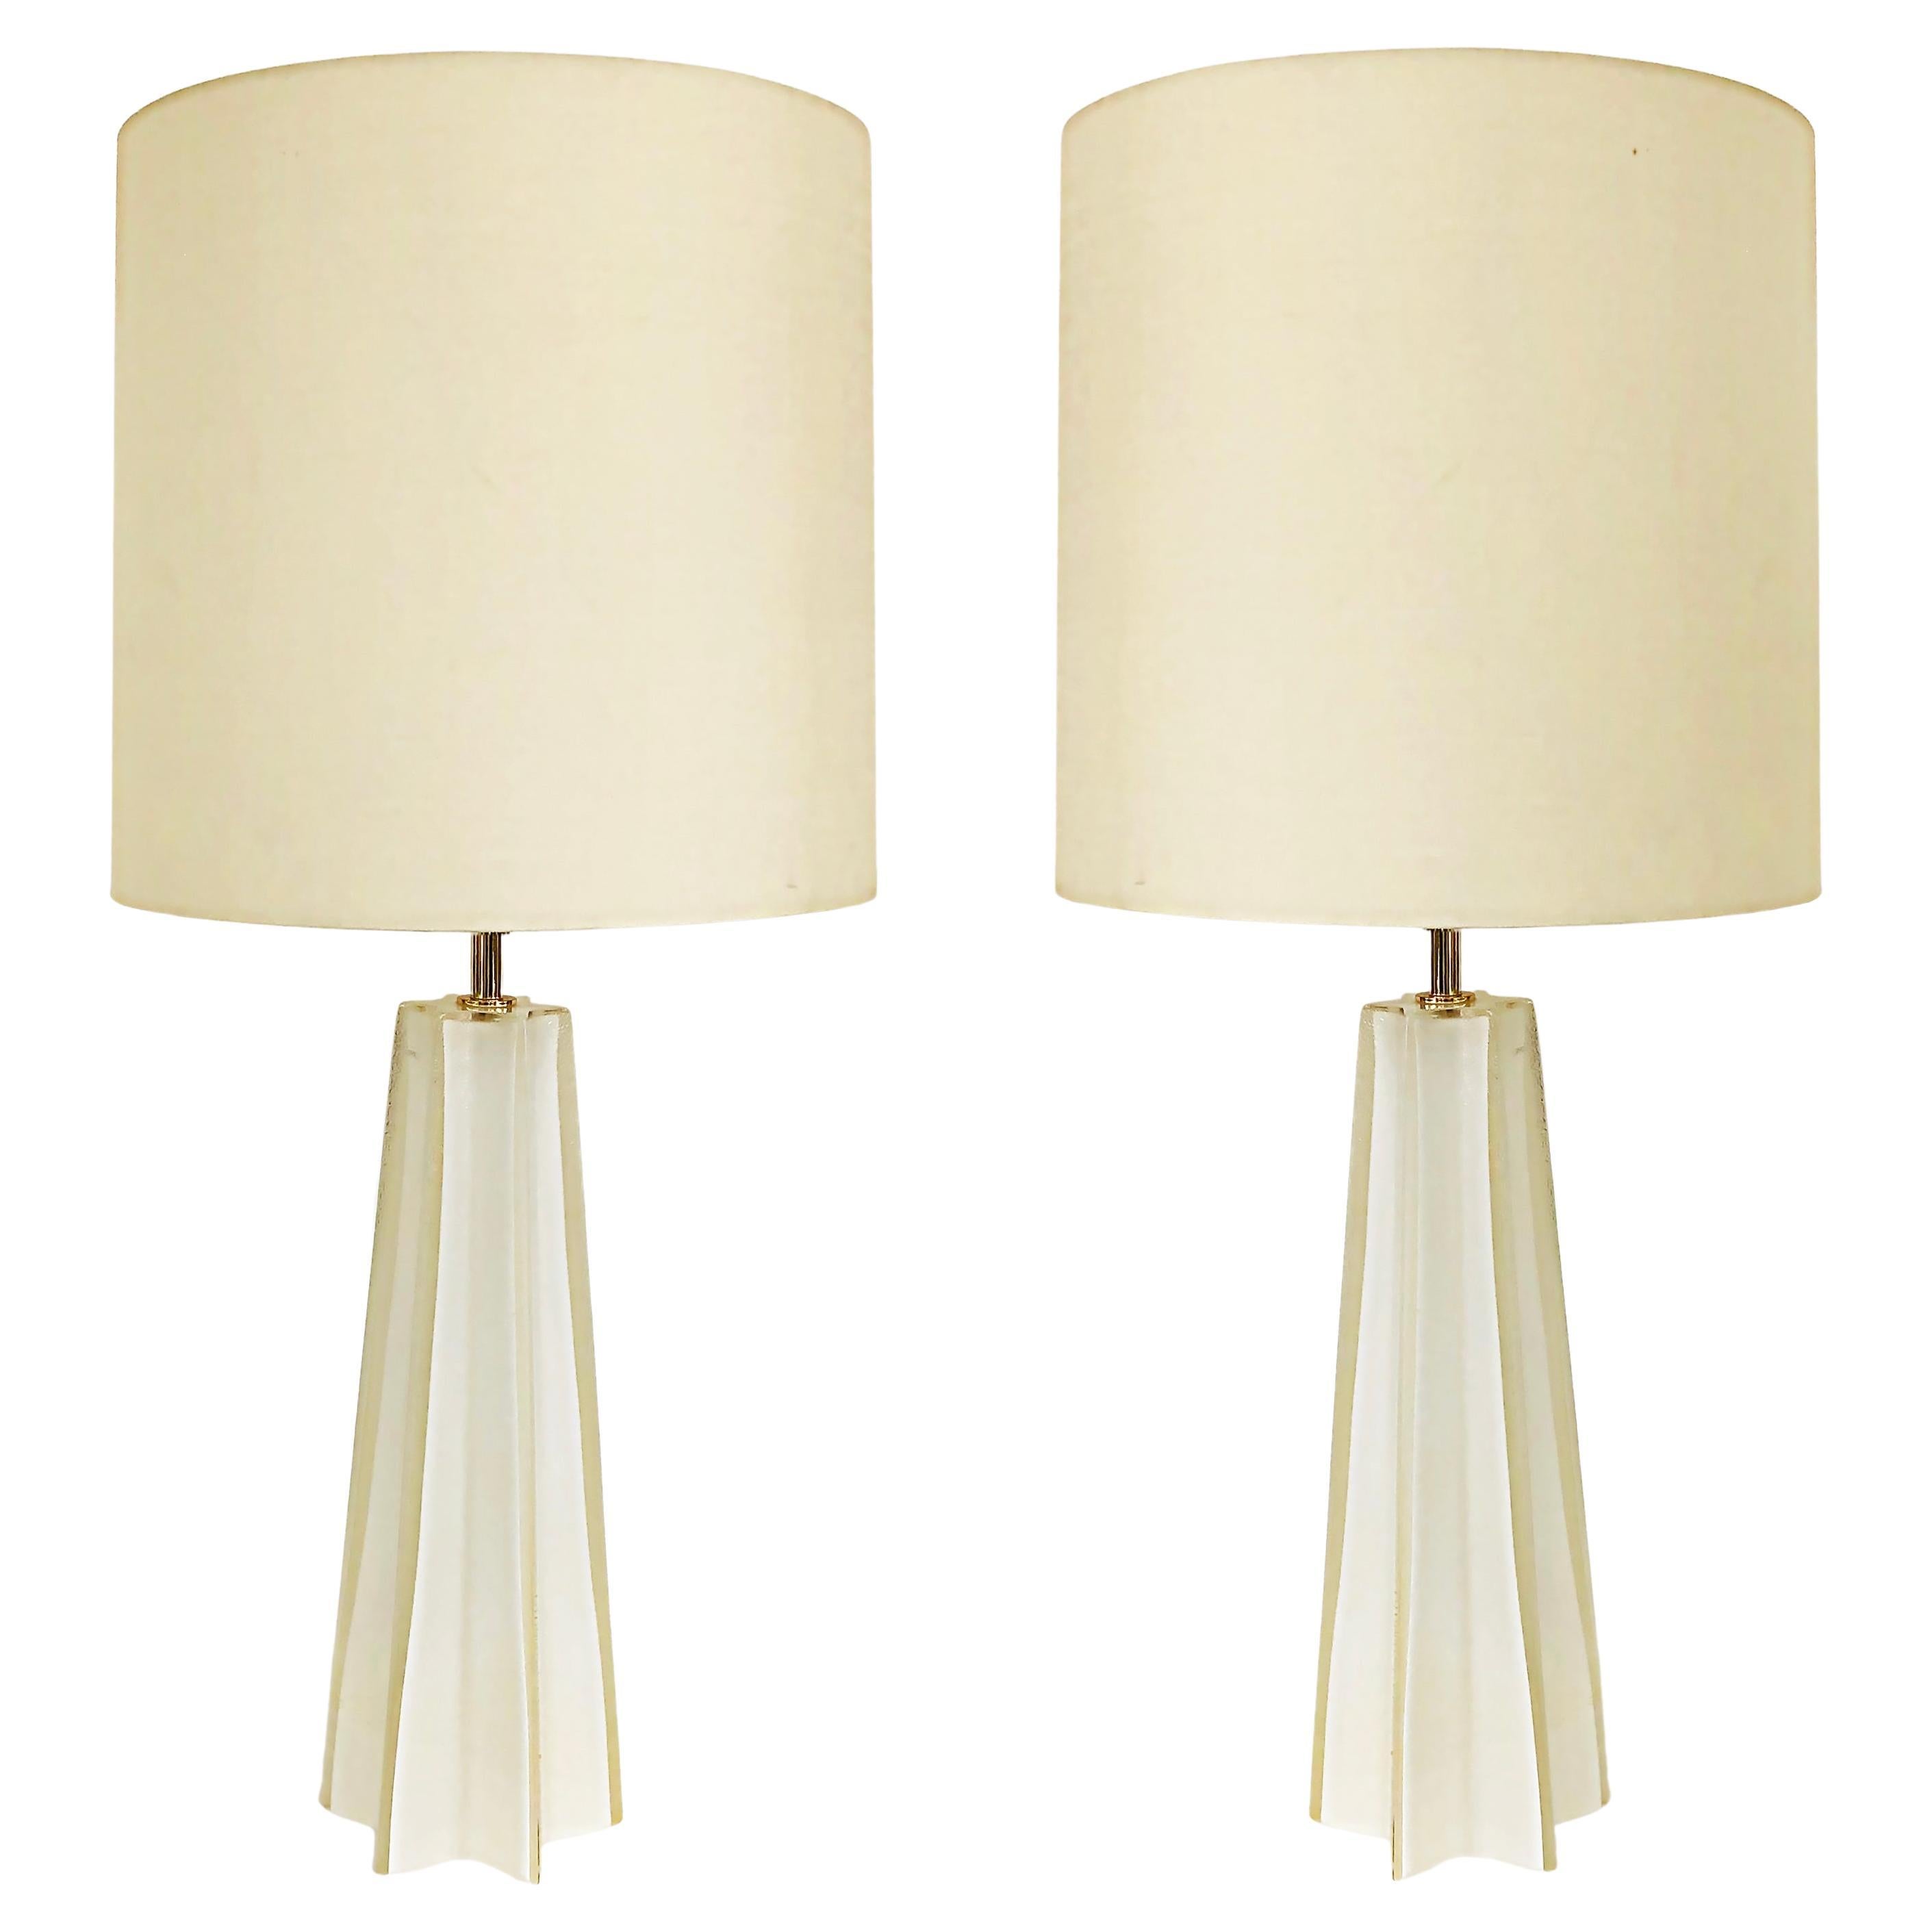 New Murano "Star" Form Cased Glass Table Lamps with Single Socket